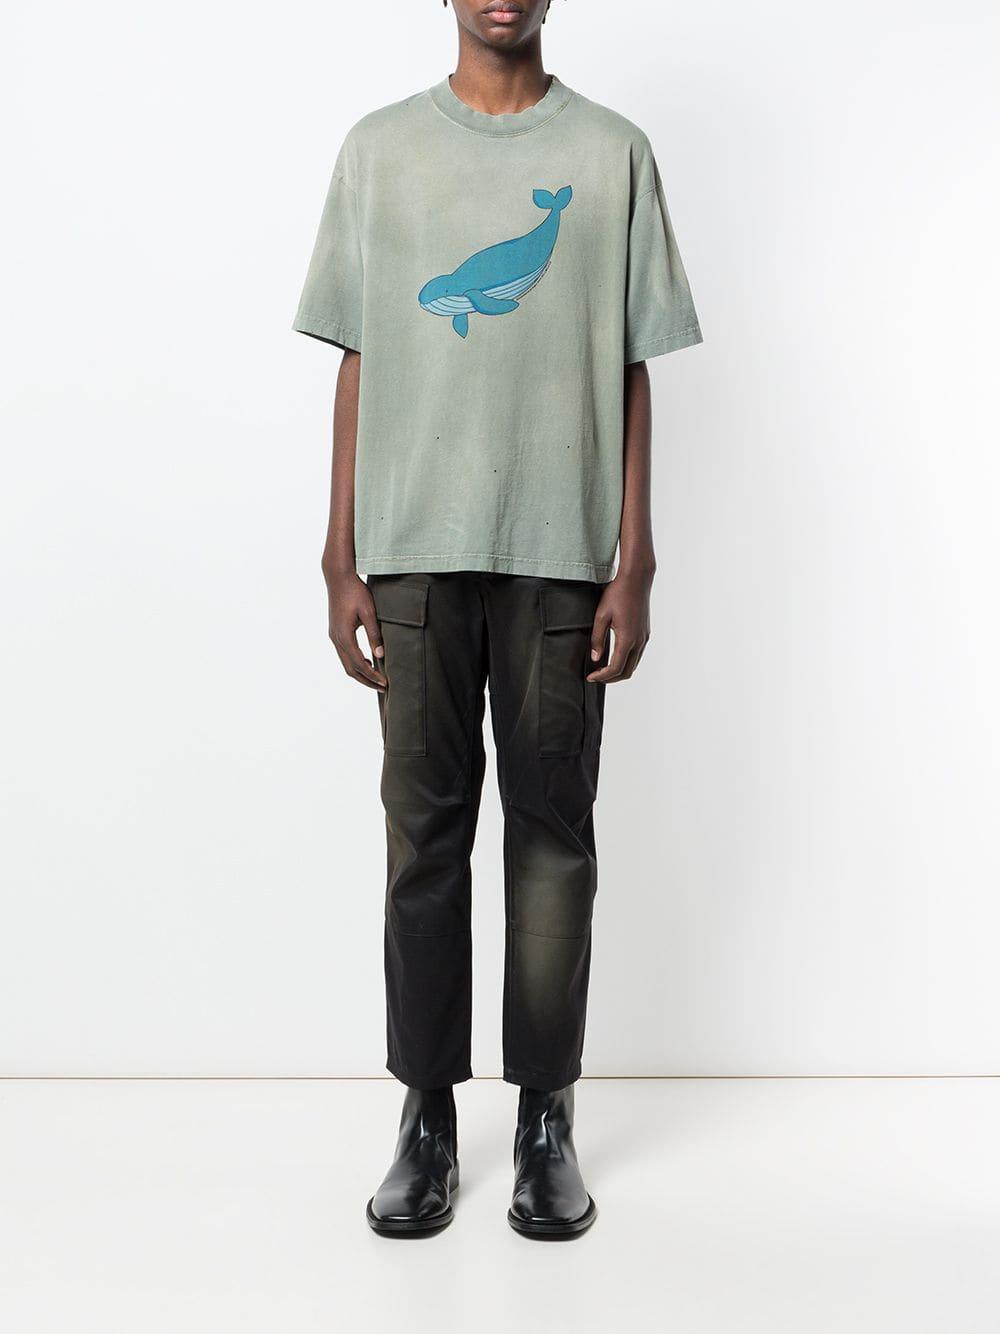 Cotton Exclusive To Farfetch - Whale Print T-shirt in Green for Men